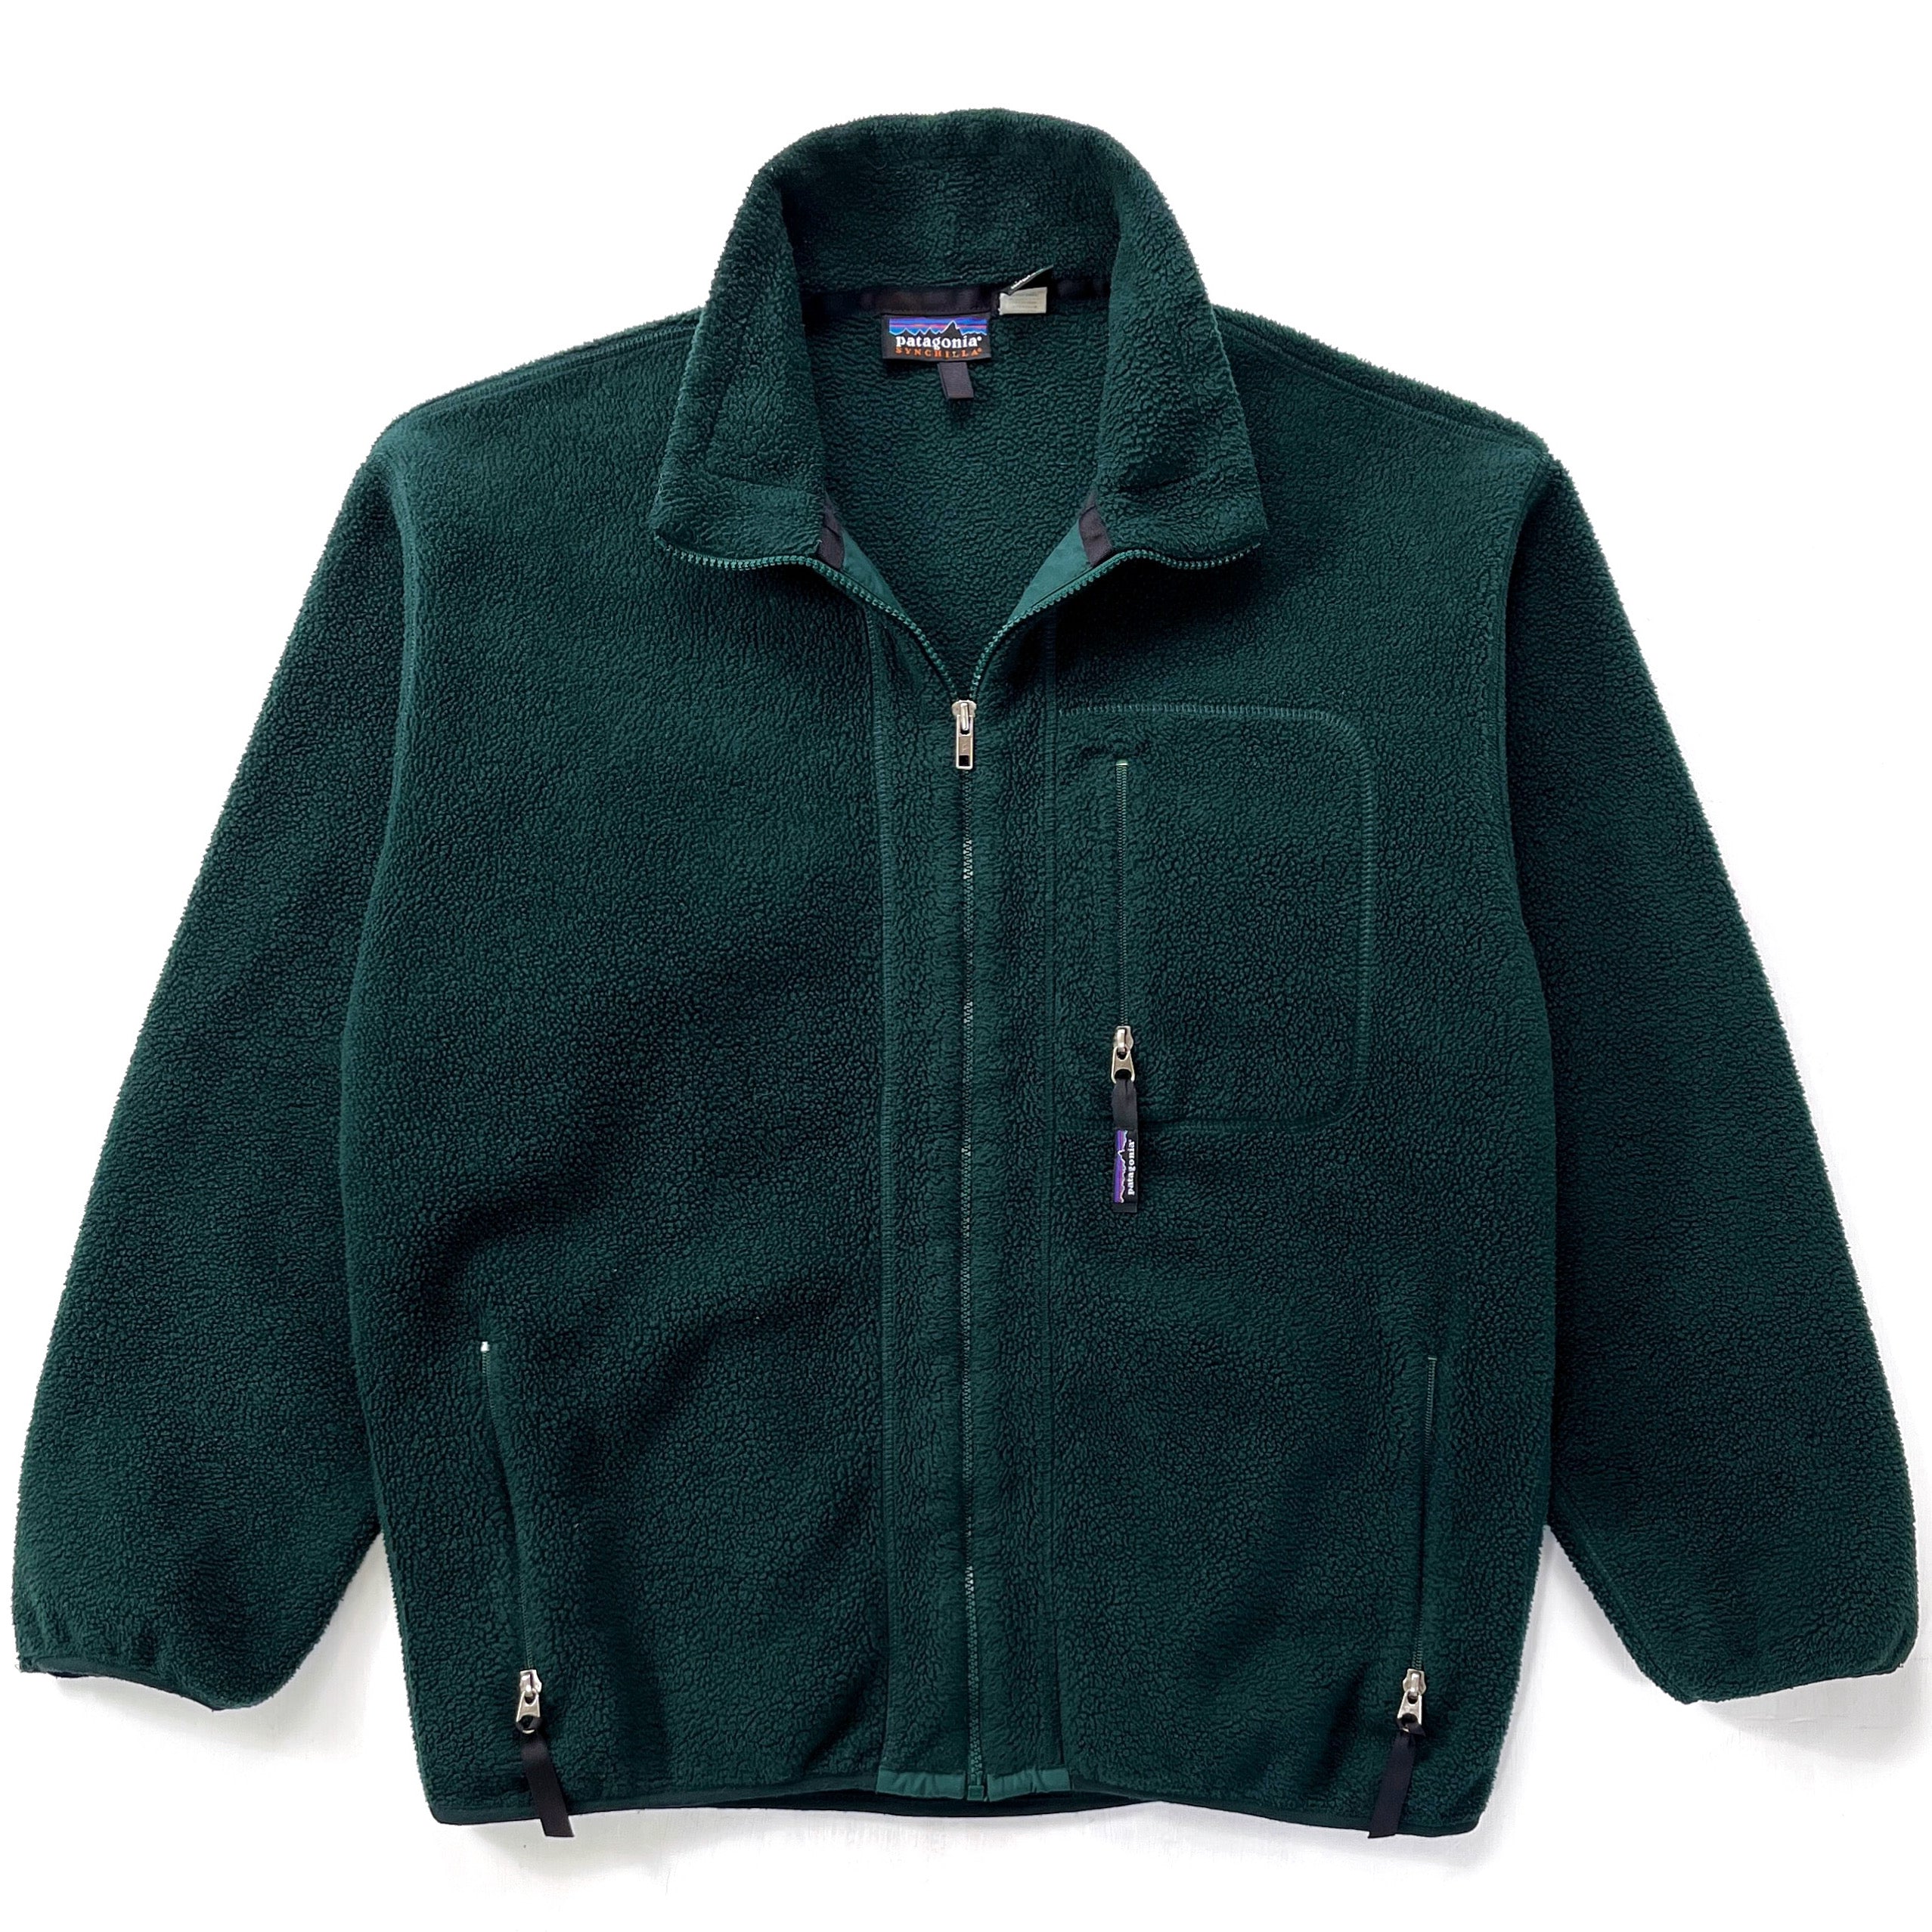 1997 Patagonia Made In The U.S.A. Synchilla Jacket, Hunter (L)